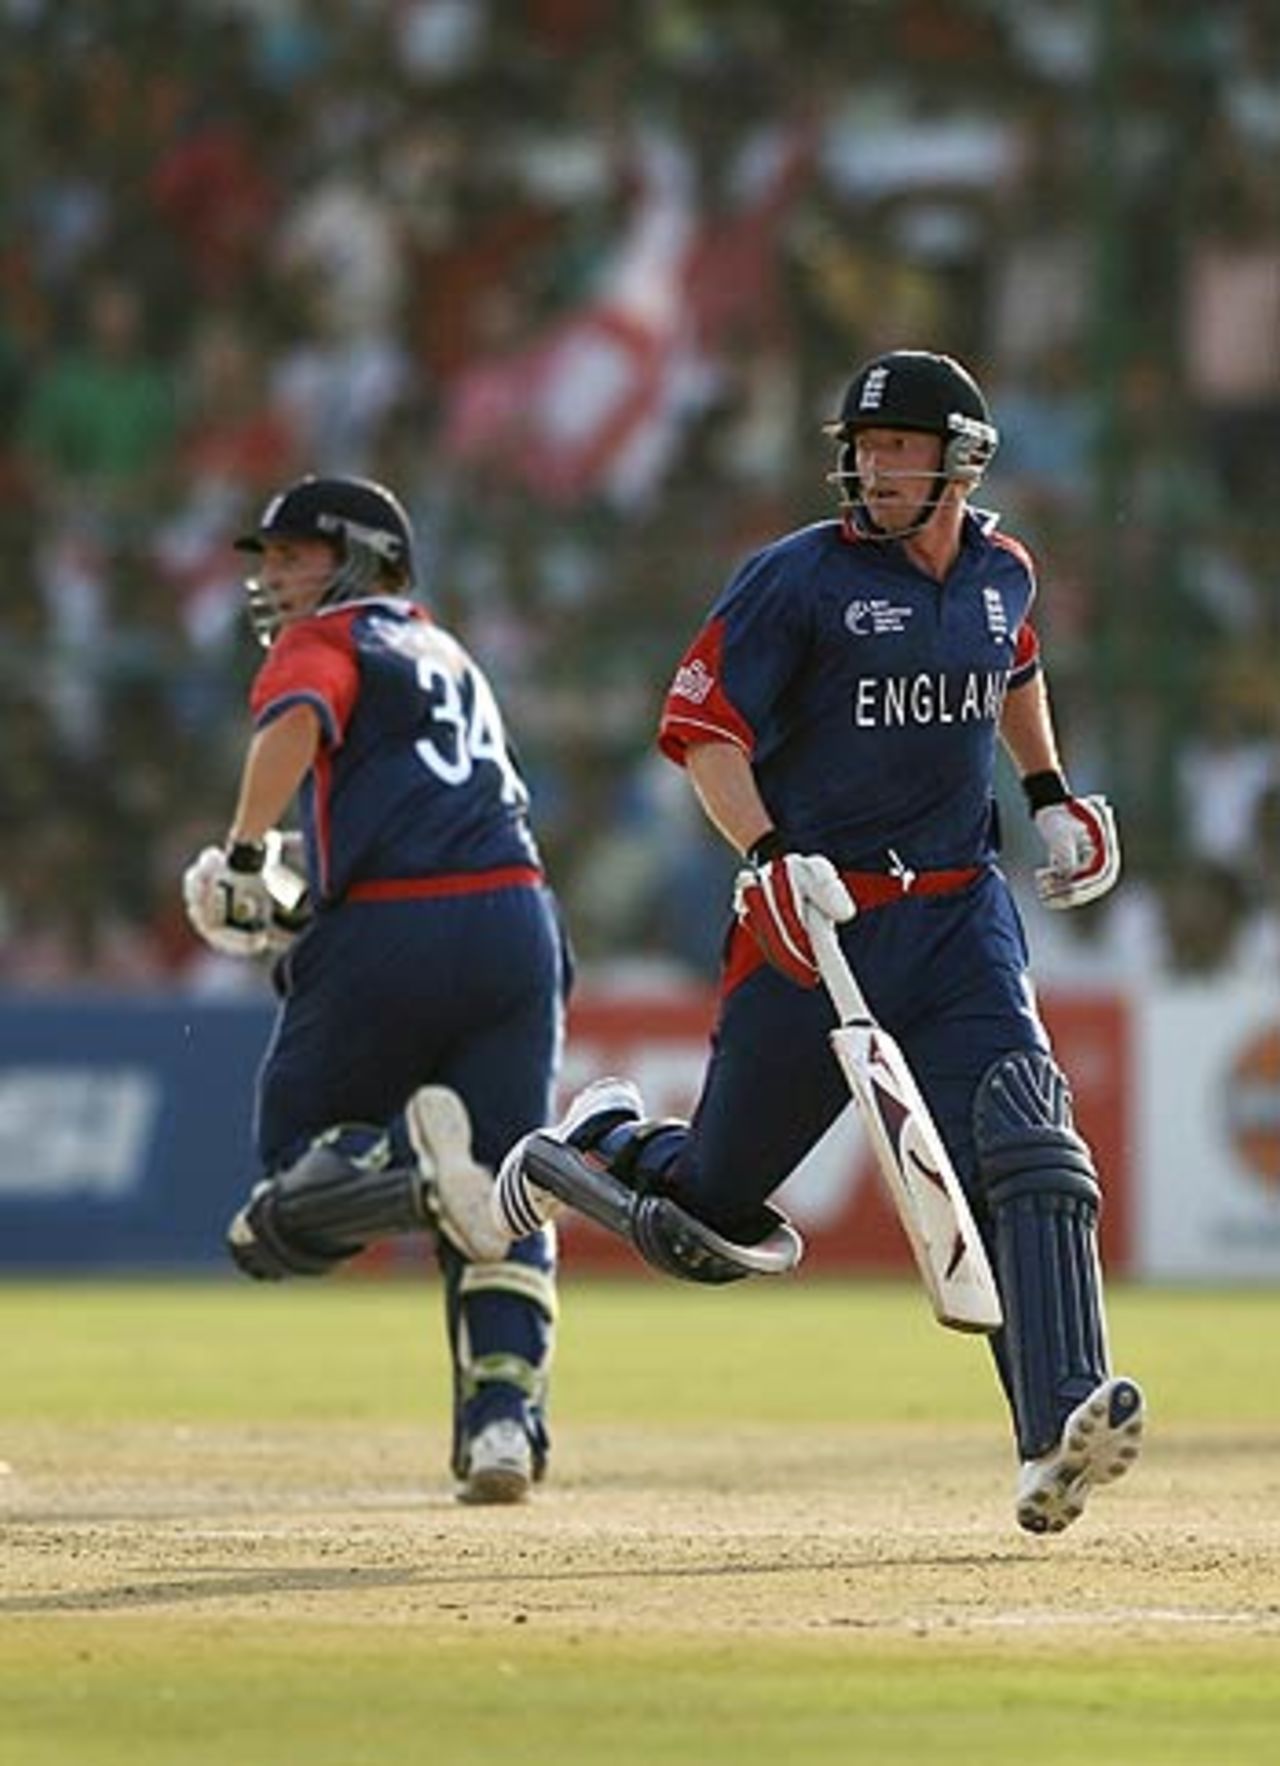 Jamie Dalrymple and Paul Collingwood put on the highest stand of the innings - 49, India v England, 1st match, Champions Trophy, Sawai Mansingh Stadium, Jaipur, October 15, 2006